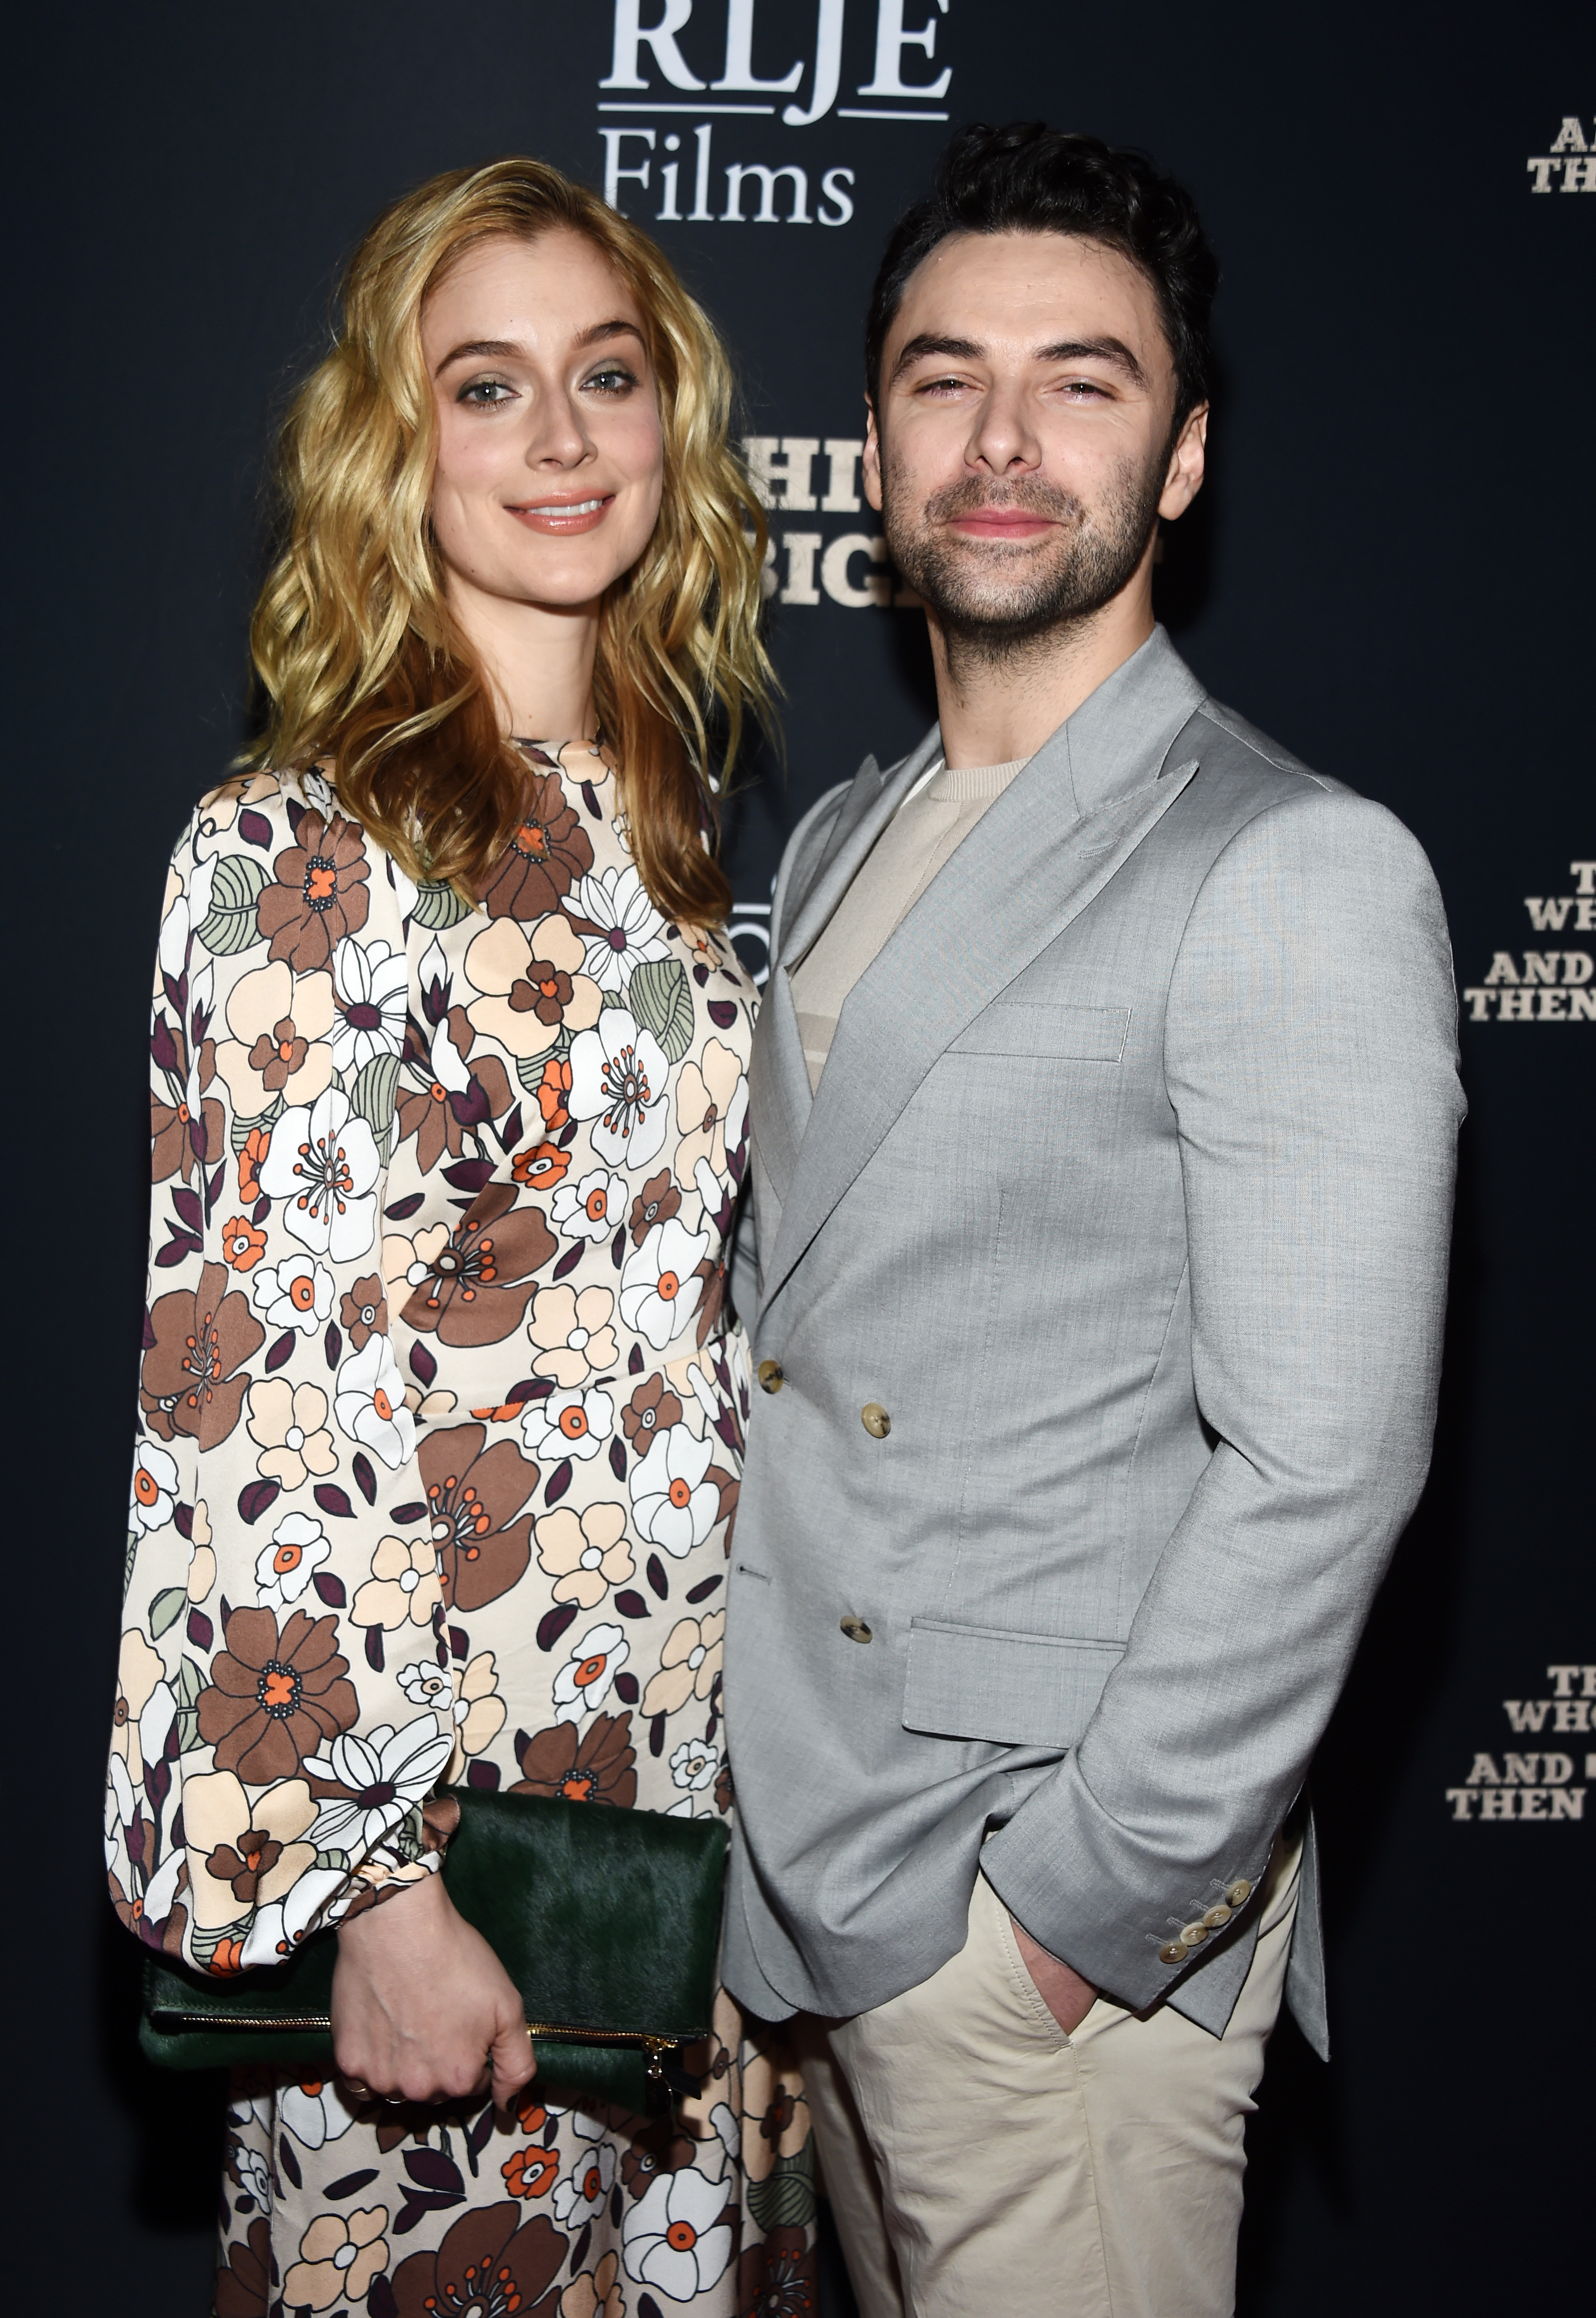 Caitlin Fitzgerald and Aidan Turner arrive at RLJE Films' "The Man Who Killed Hitler And Then Bigfoot" premiere at ArcLight Hollywood on February 04, 2019 in Hollywood, California | Source: Getty Images